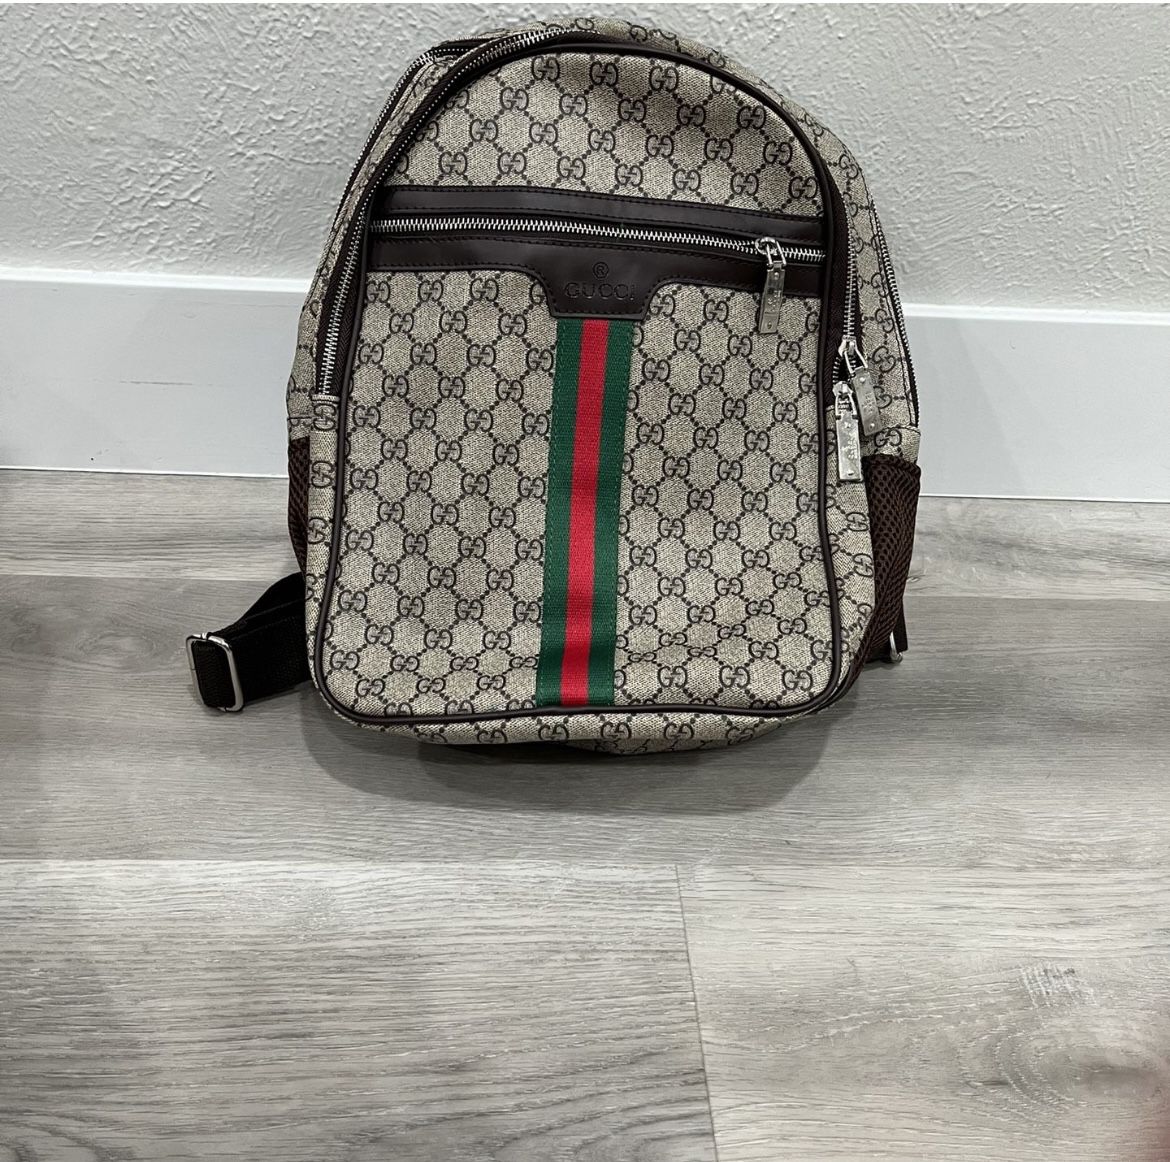 Gucci Techno Canvas Backpack for Sale in Fullerton, CA - OfferUp